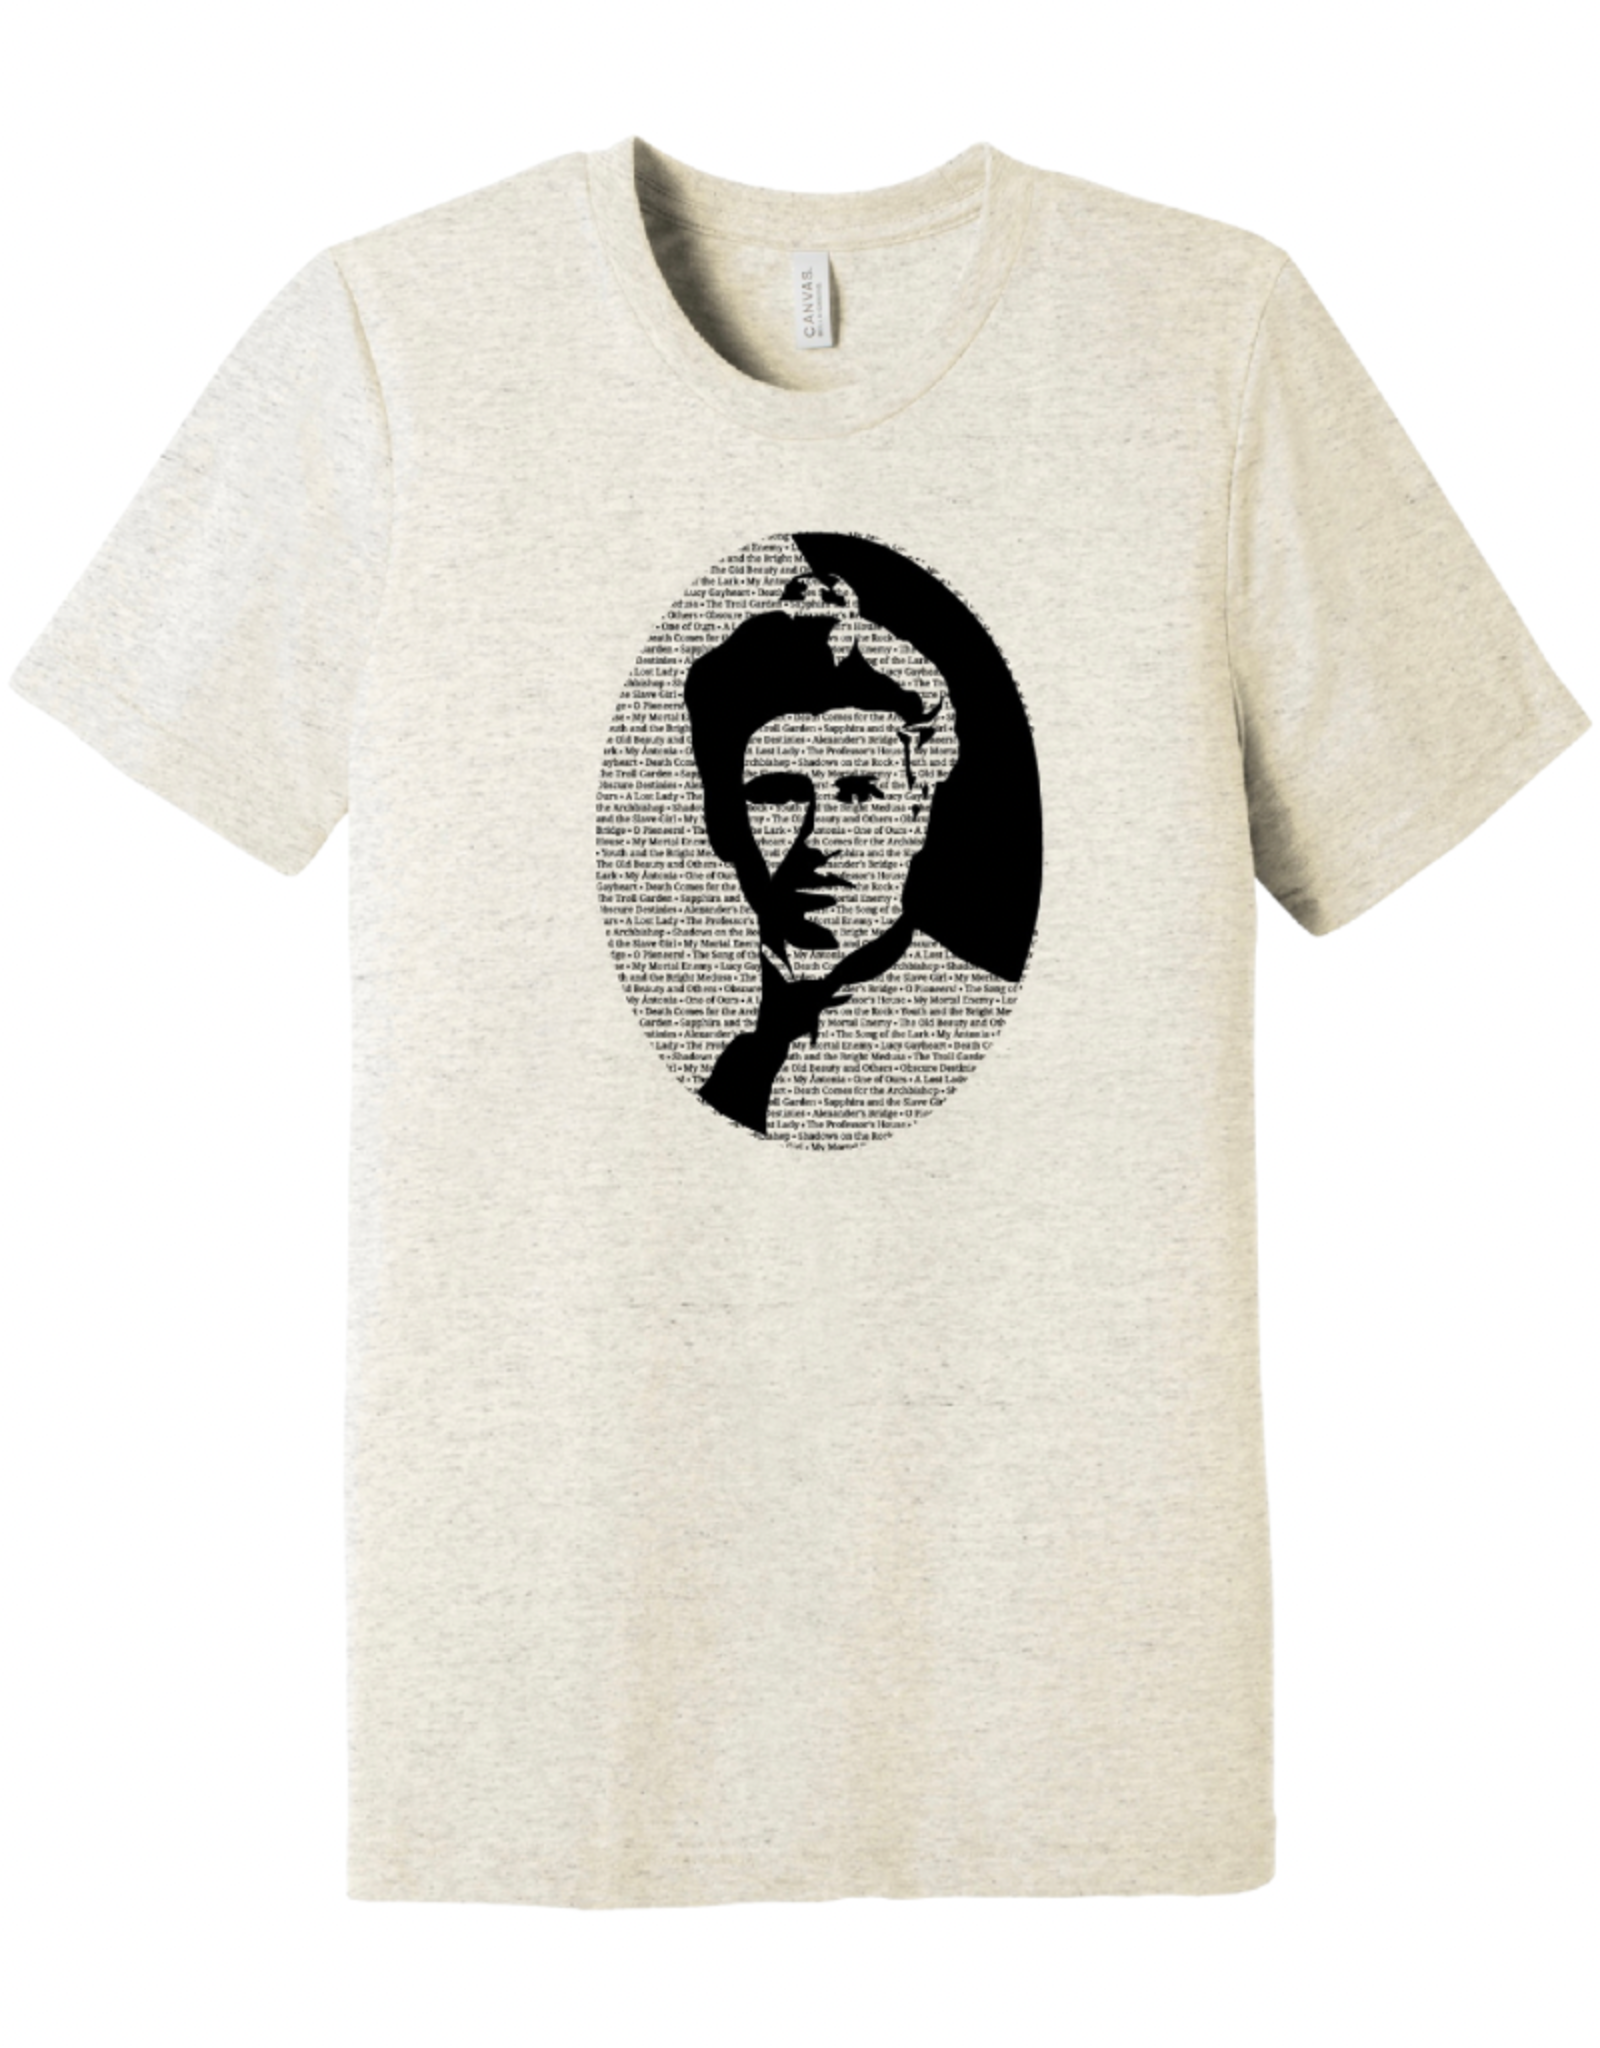 Willa Cather Portrait and Novel Titles T-Shirt